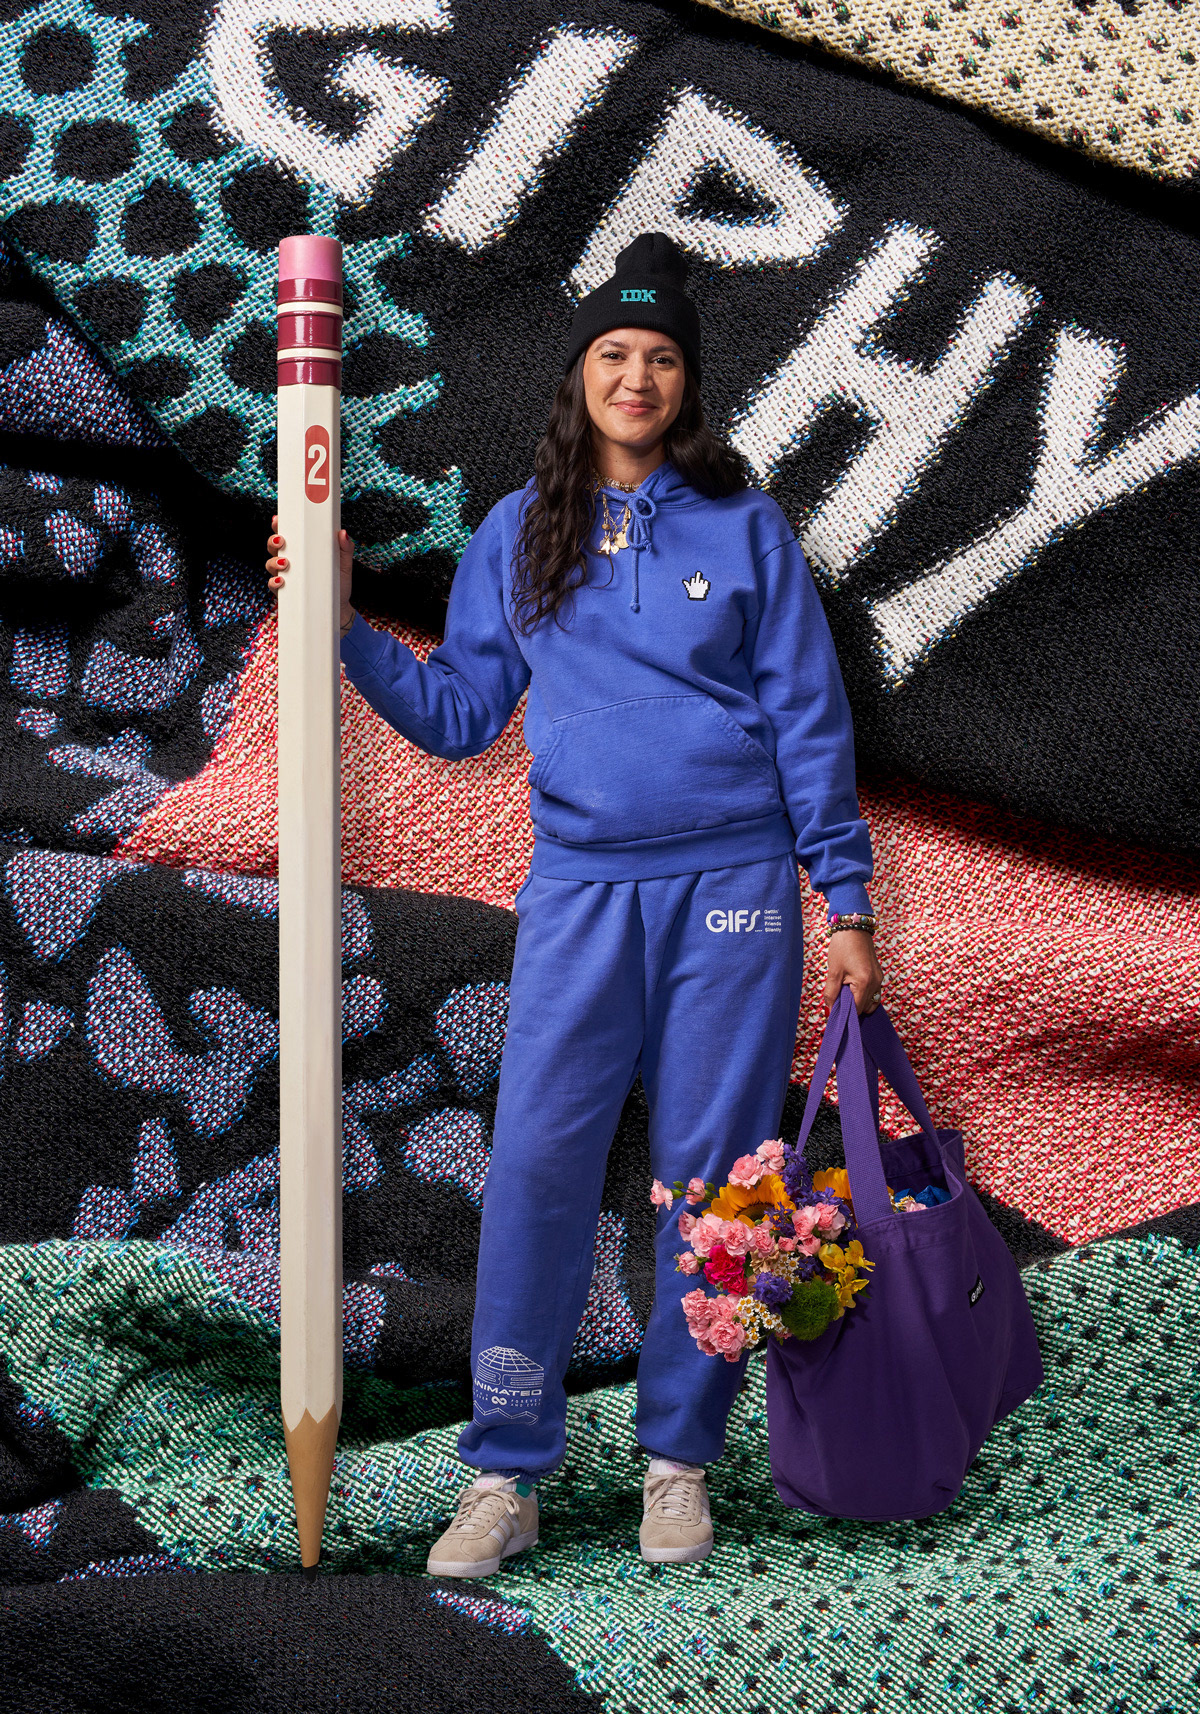 Custom purple sweatsuit and Purple tote bag for GIPHY